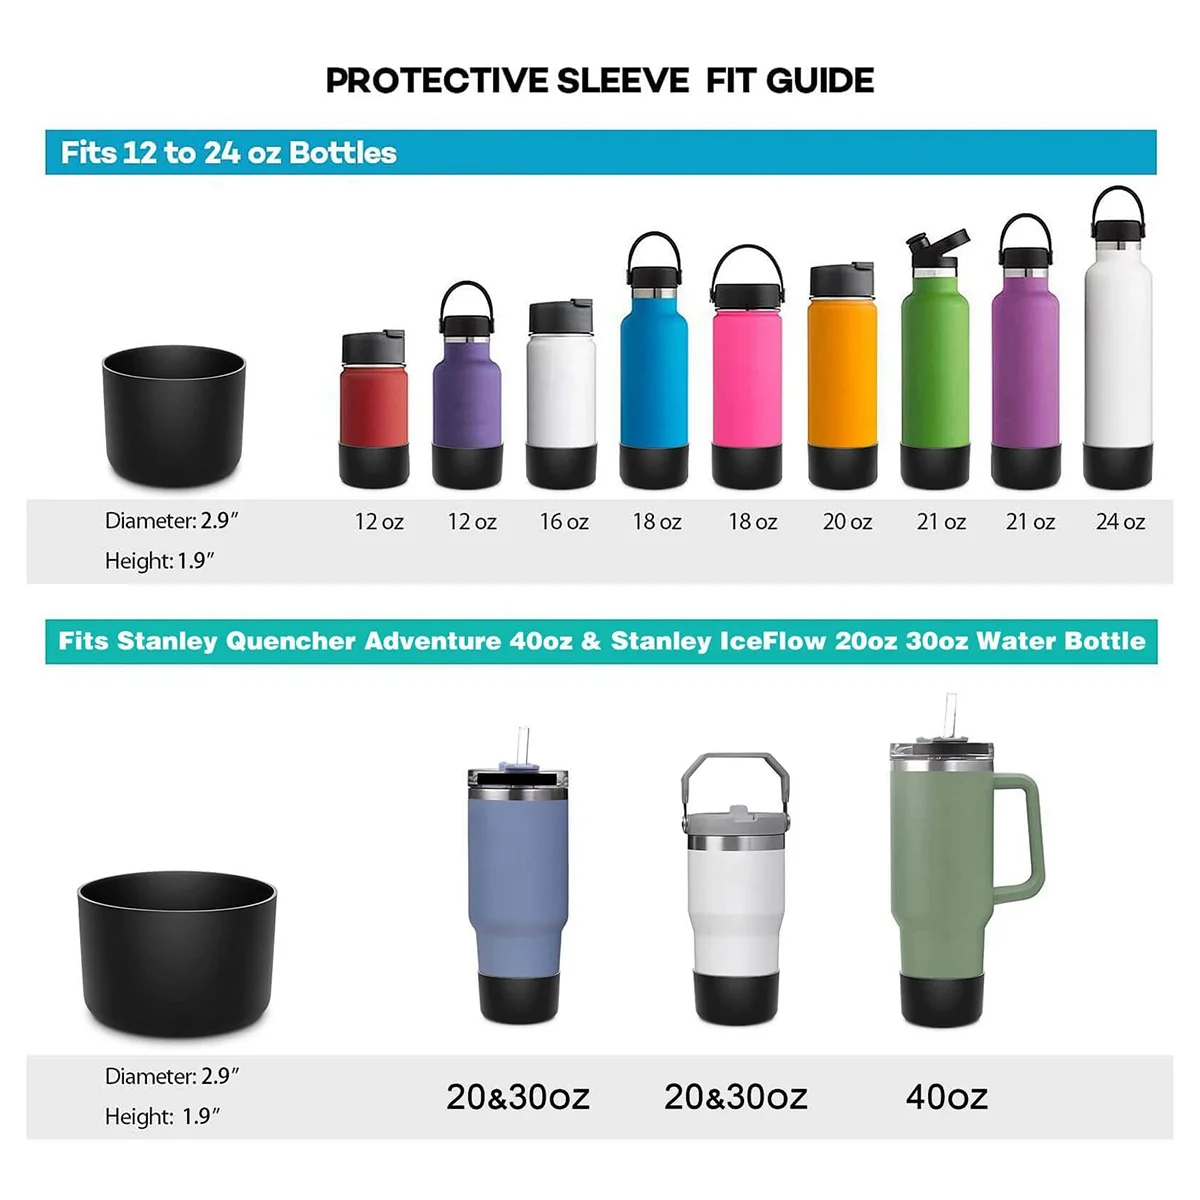 https://ae01.alicdn.com/kf/S652cf3b1ac6c4d44a463a445e94d5260v/4PCS-Cup-Silicone-Bottom-Protective-Sleeve-Boot-for-Stanley-Tumbler-Quencher-Adventure-40Oz-IceFlow-20Oz-30Oz.jpg